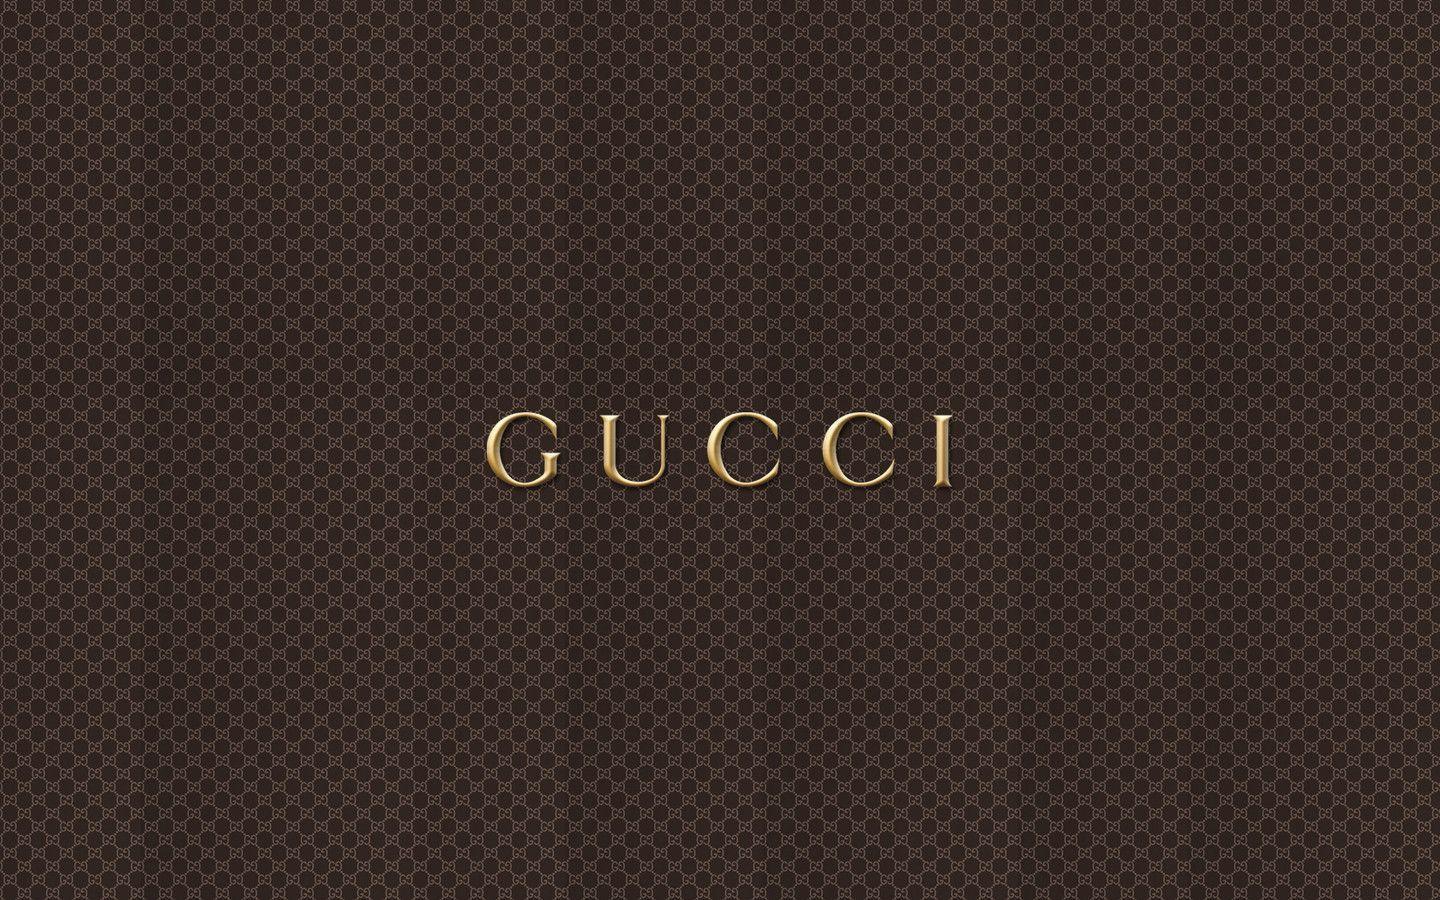 Gucci Logo Wallpapers 1440x900